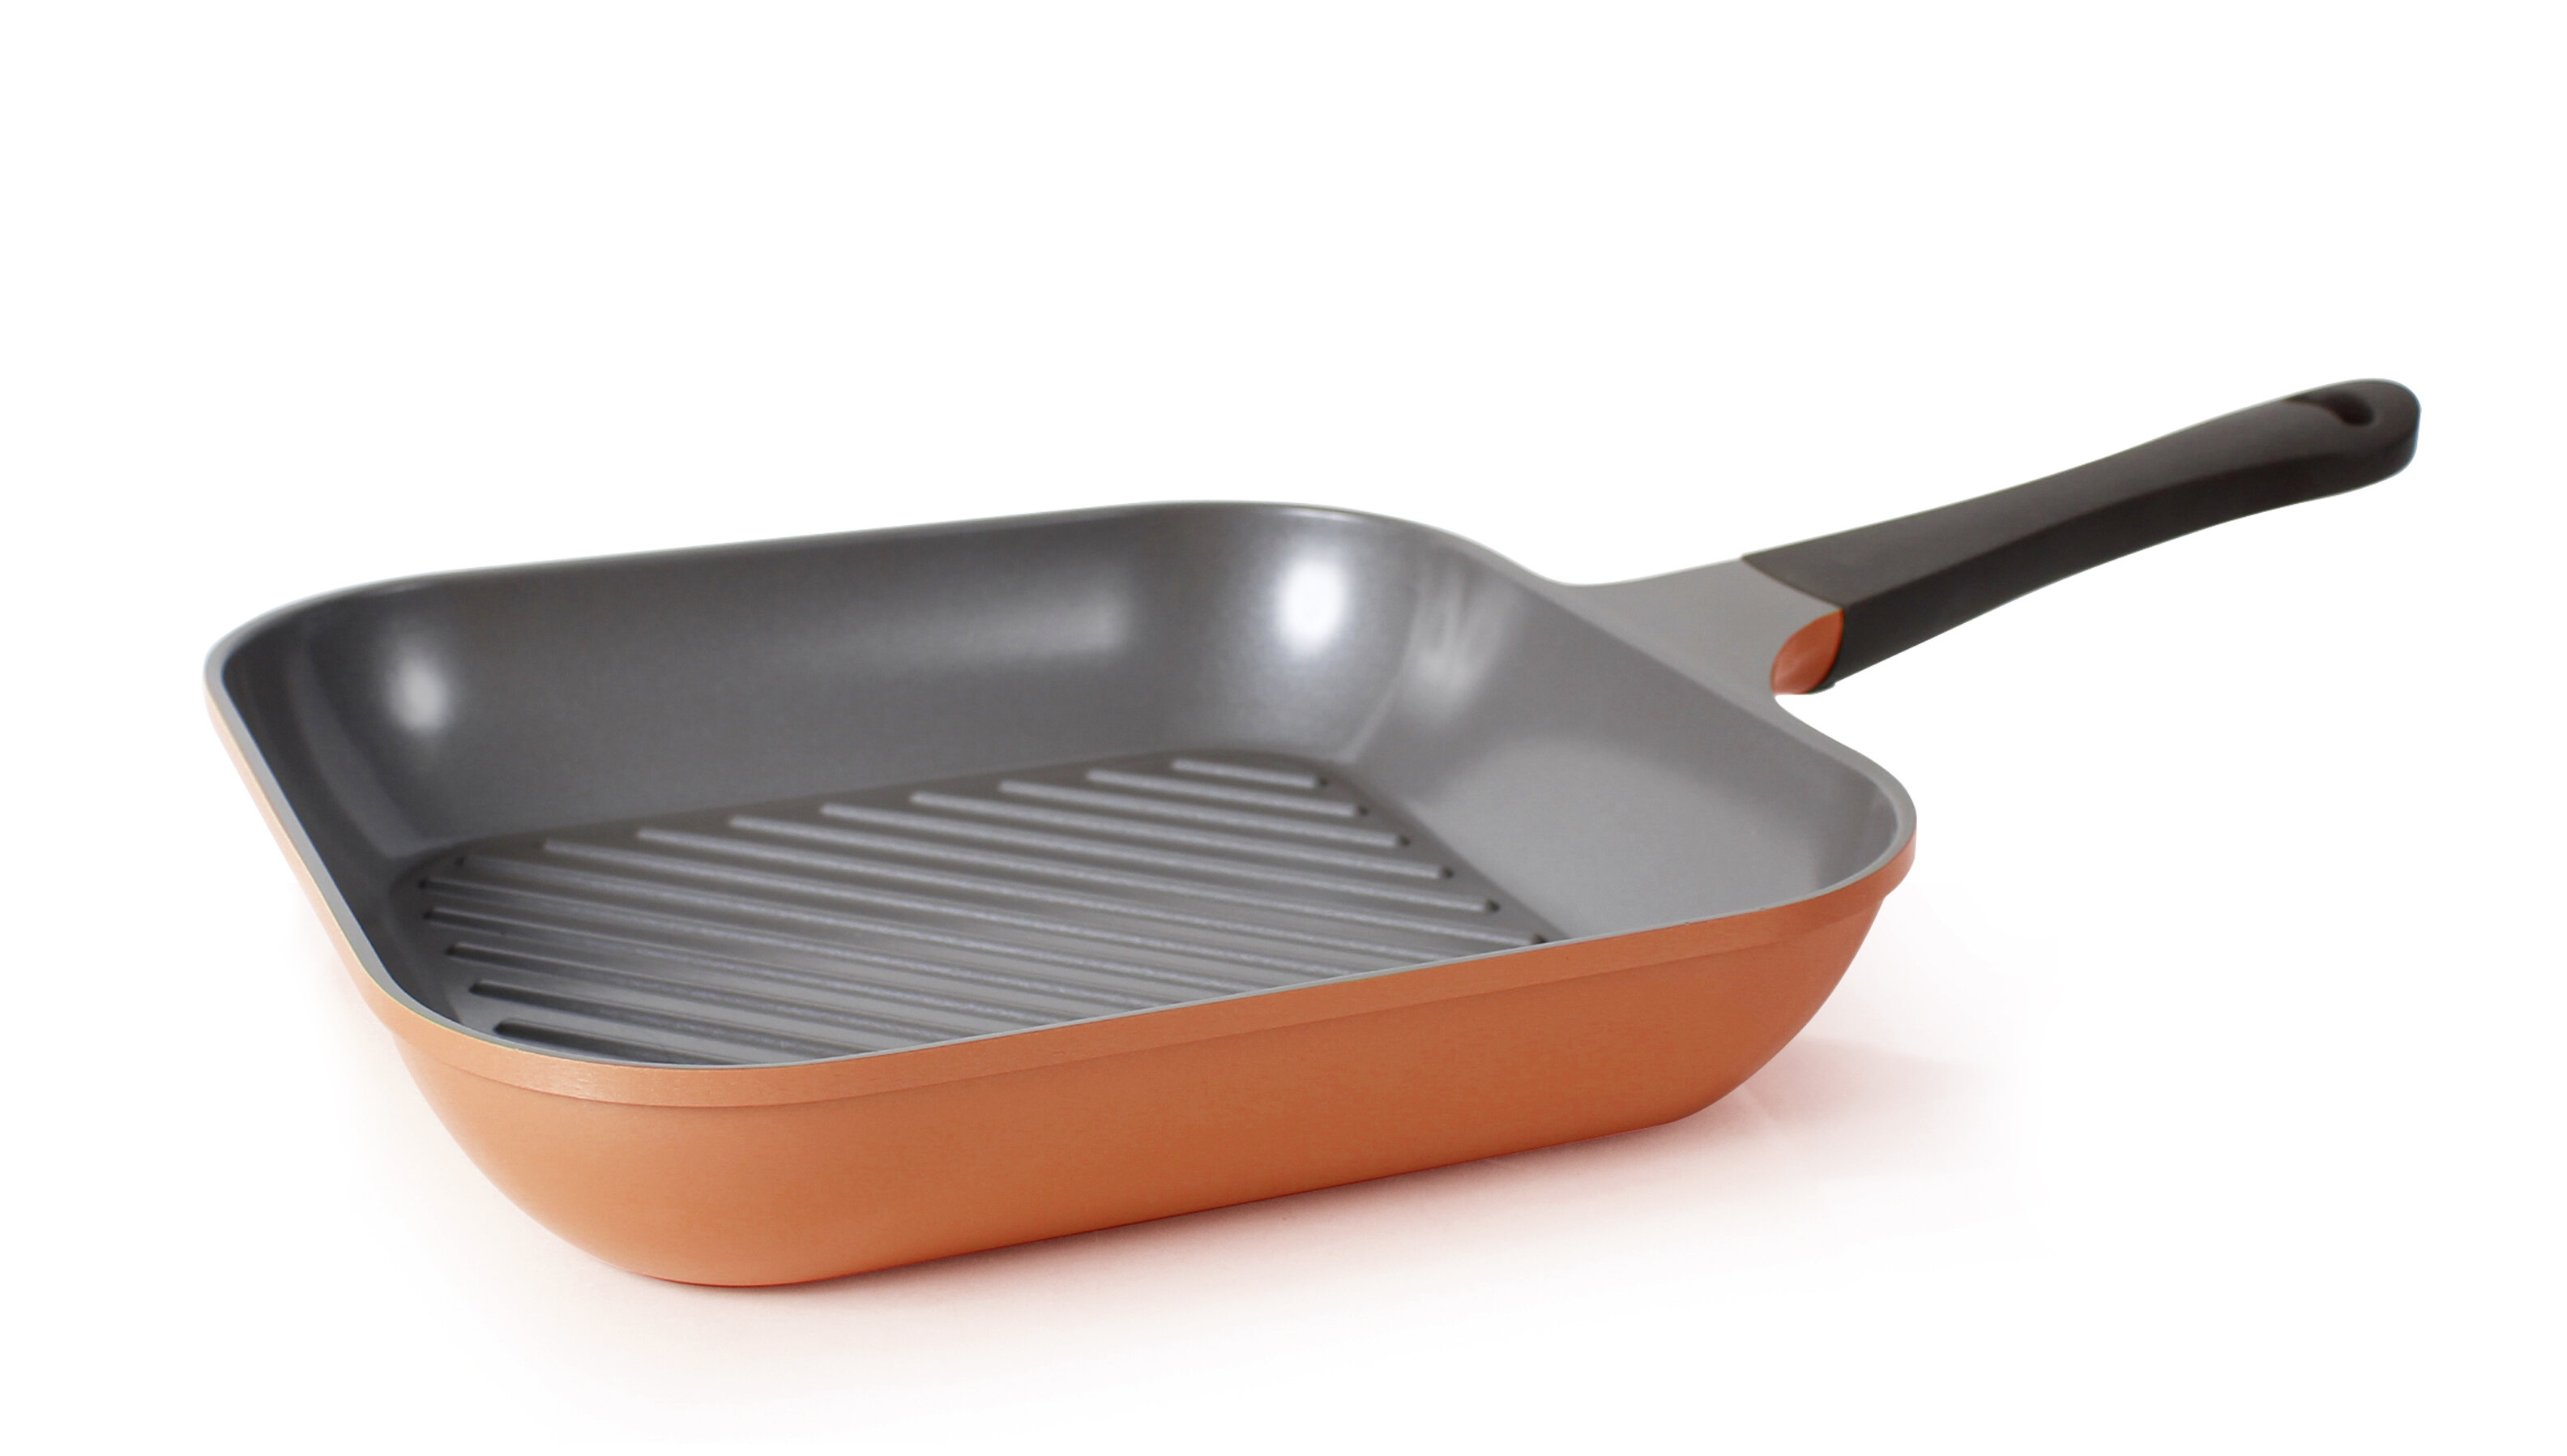 Nordic Ware Pro Cast Traditions 19.25 in. Aluminum Non-Stick Reversible  Grill and Griddle Pan